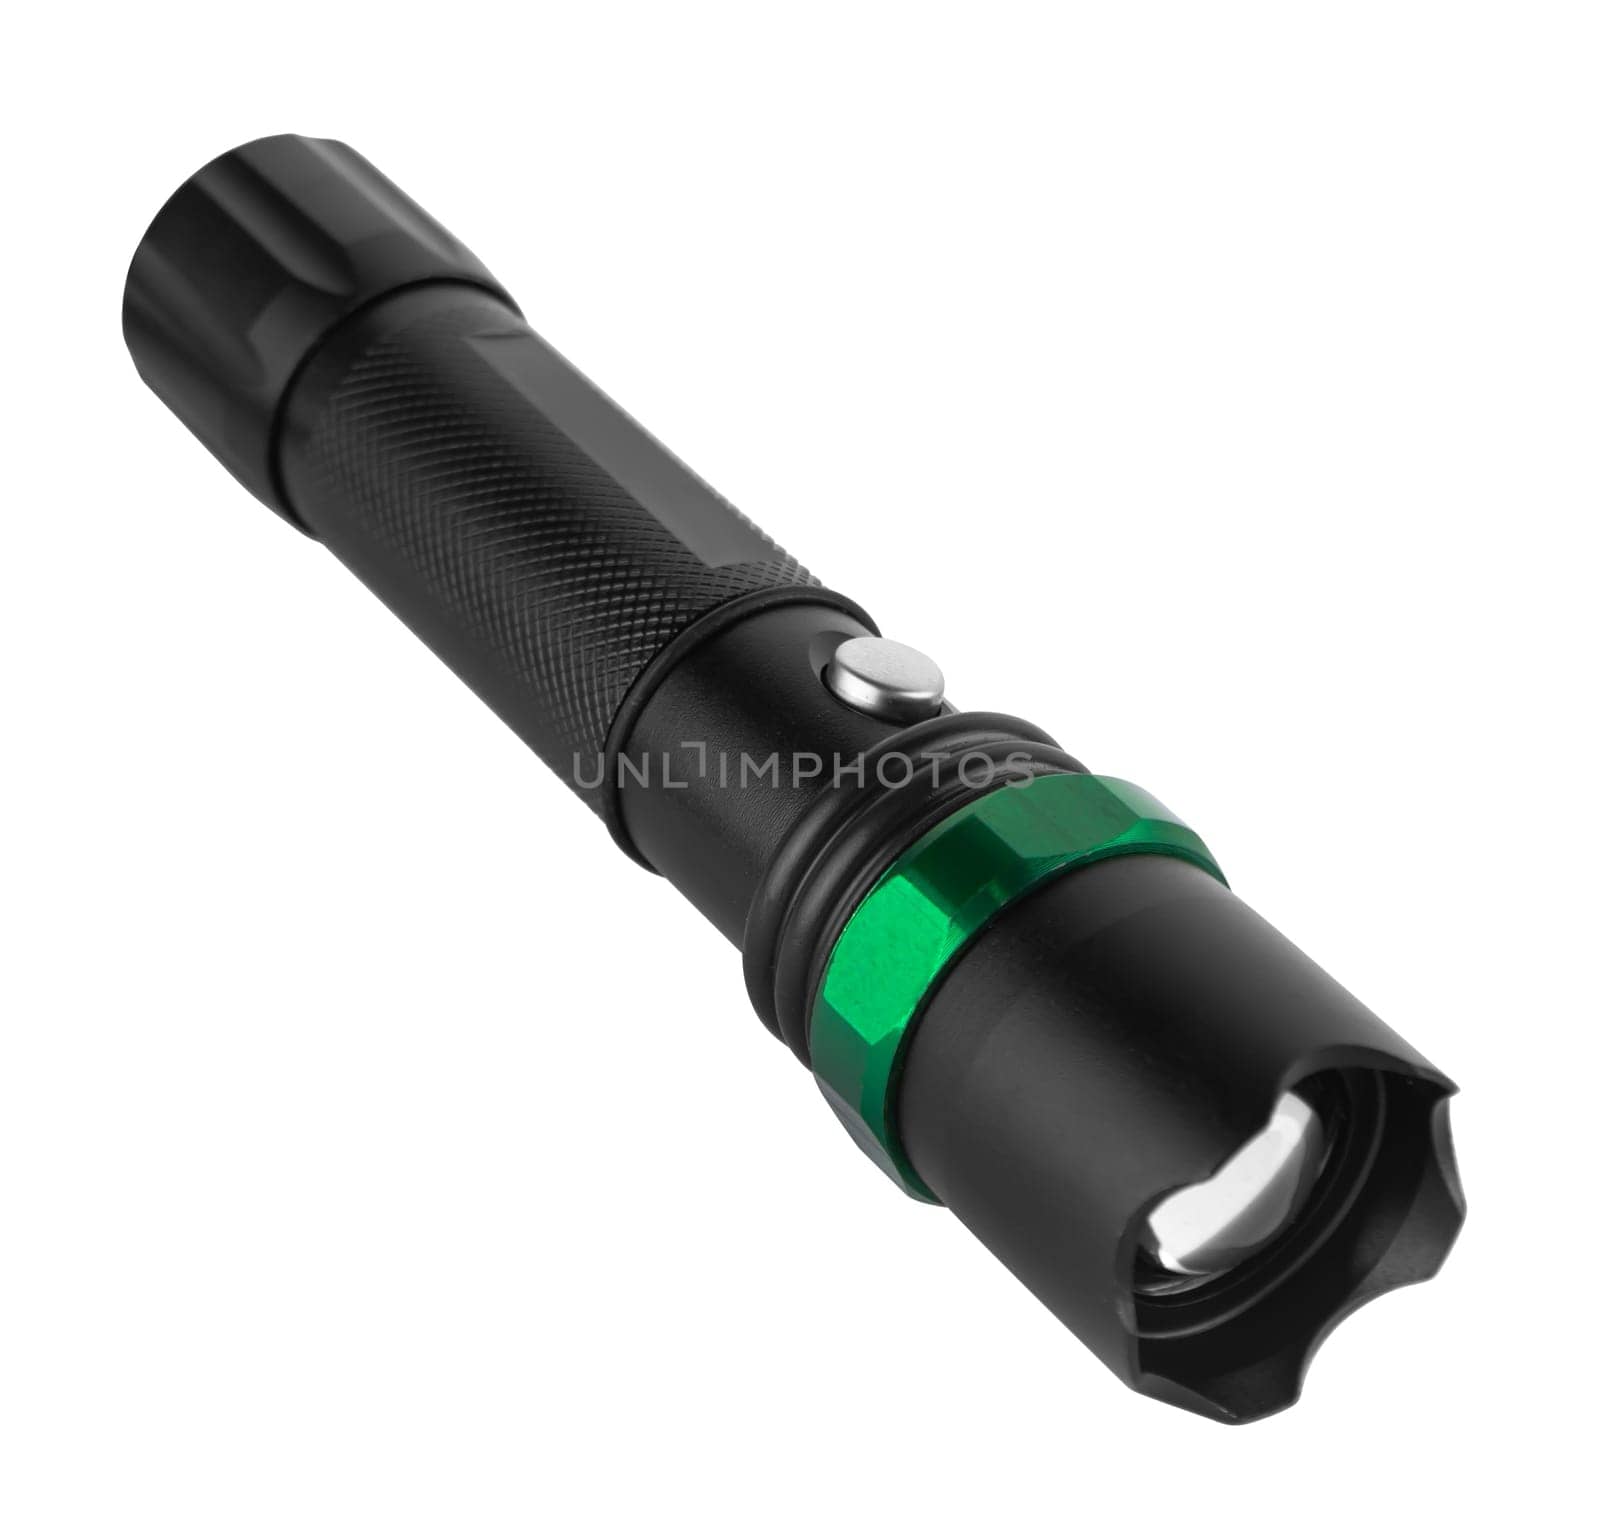 Hand-held LED flashlight, white background in insulation by A_A